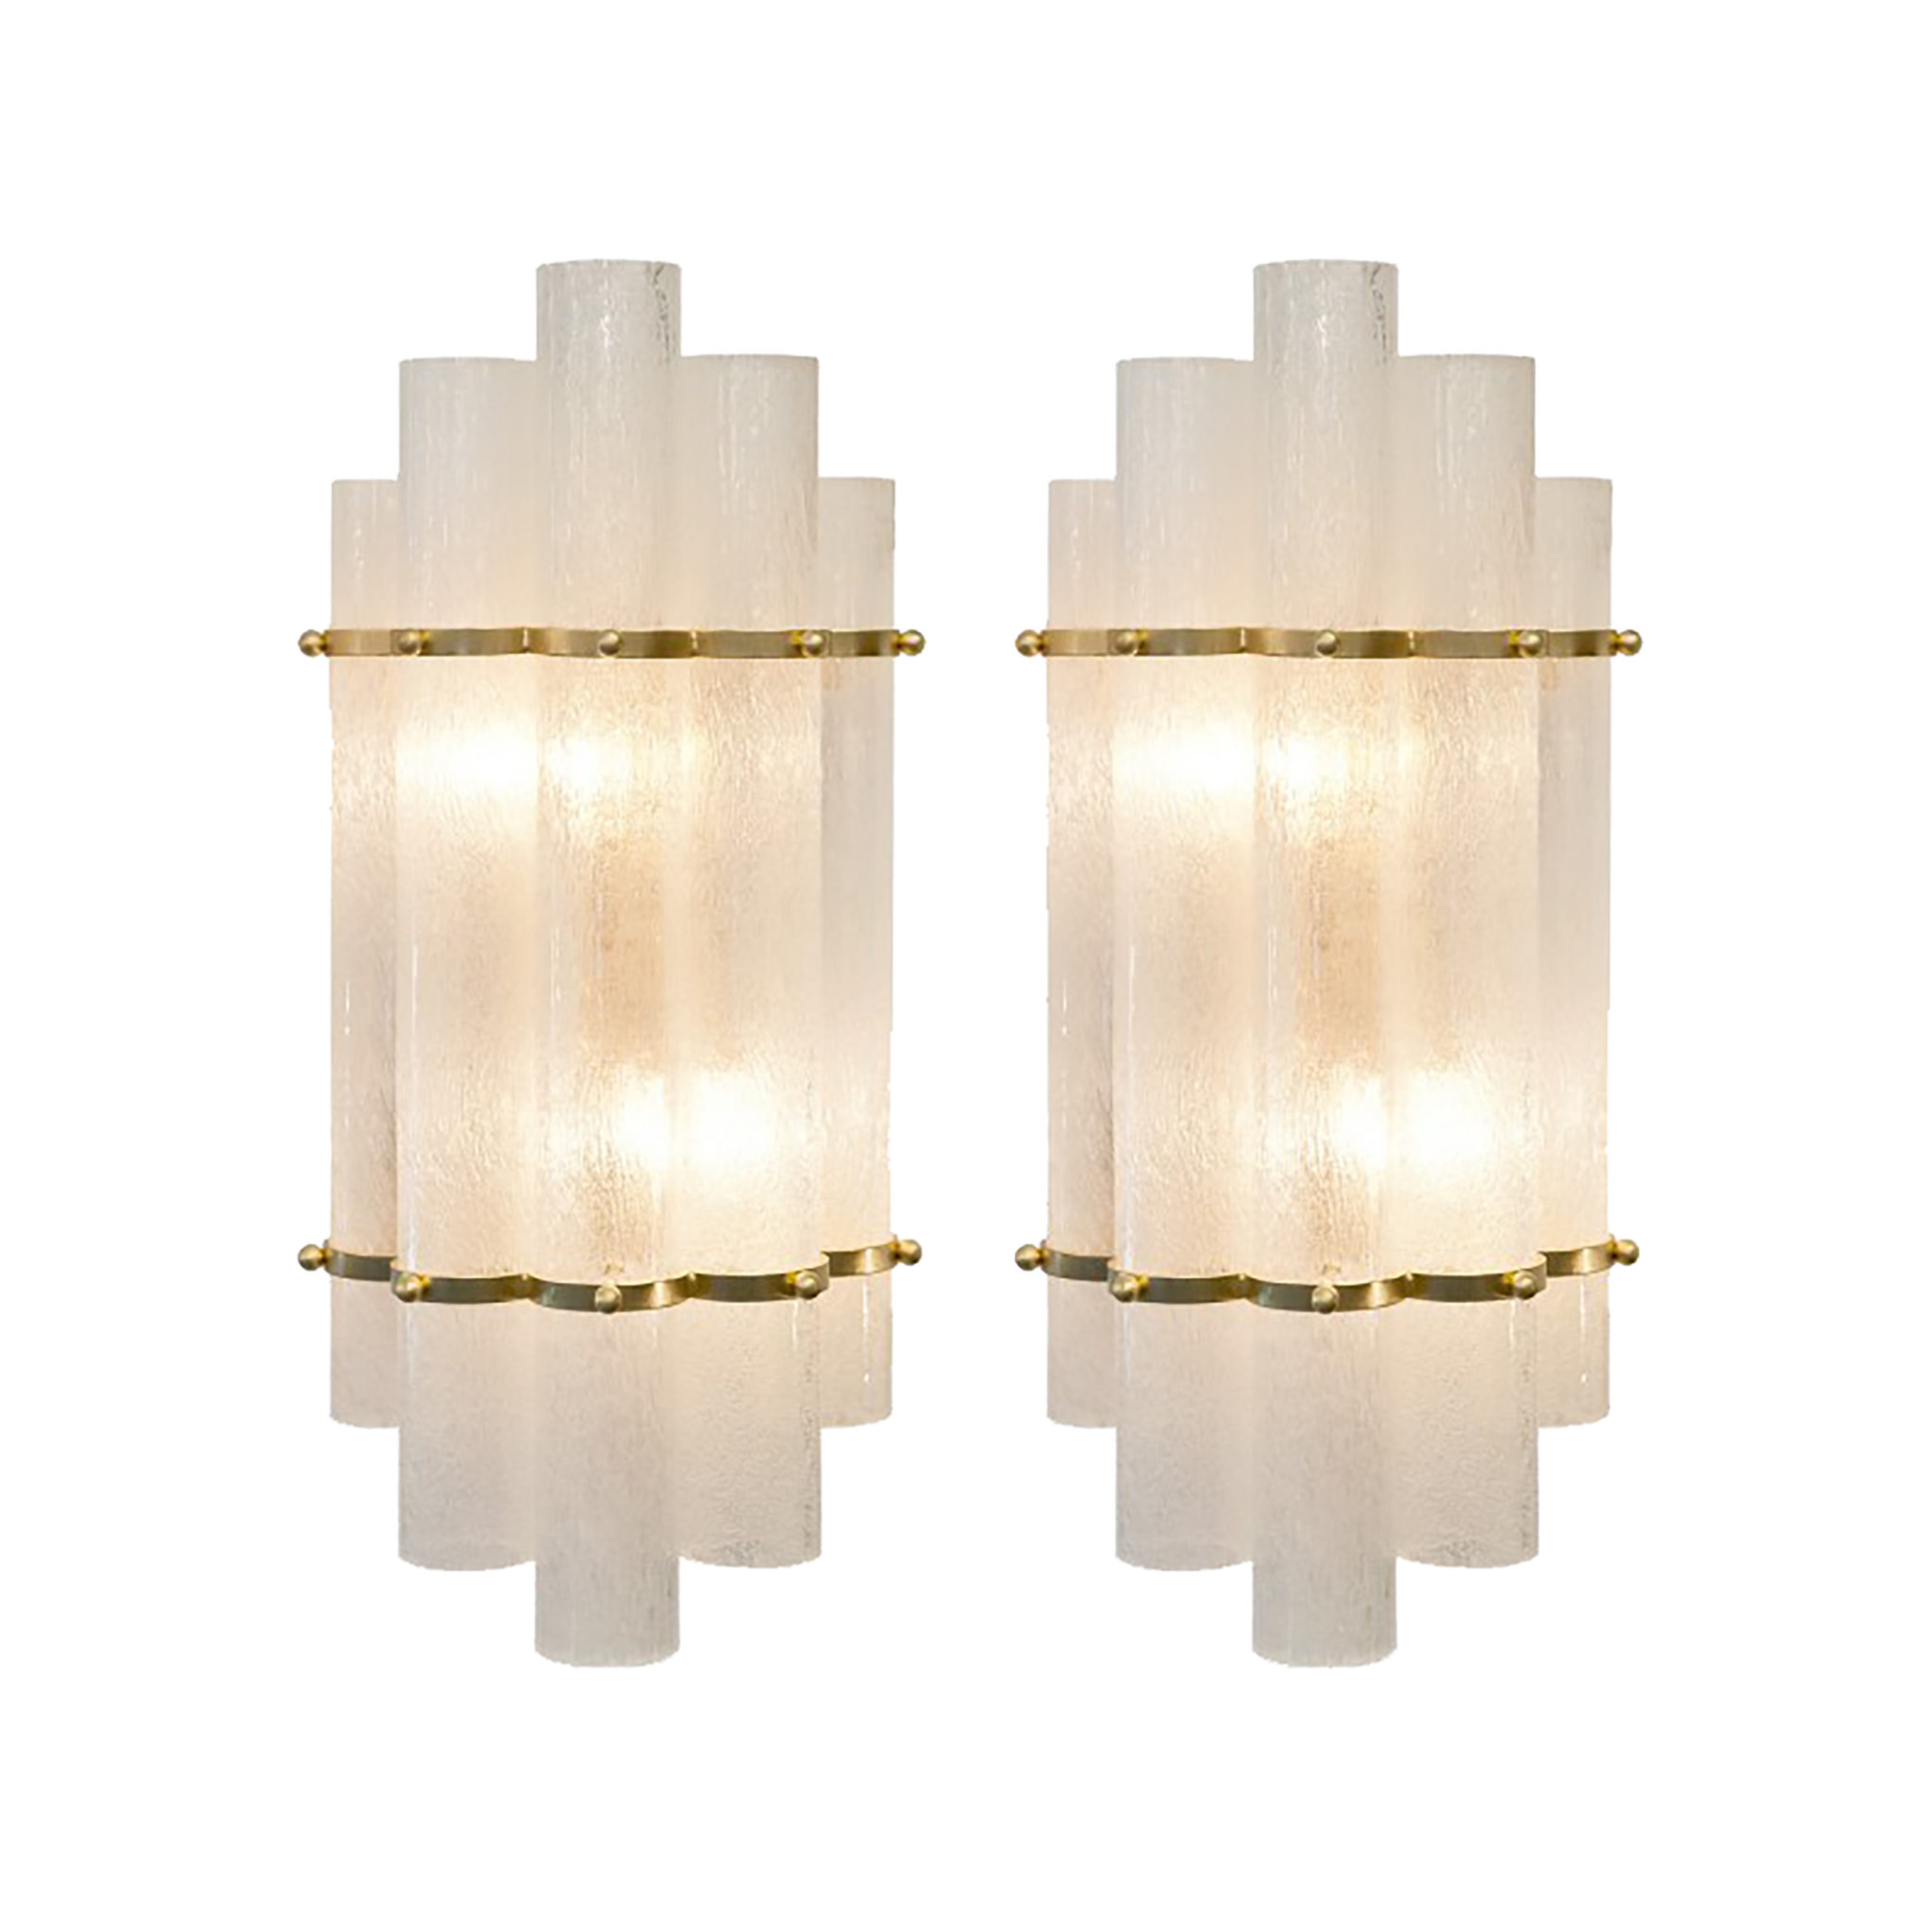 Glass and bronze sconces